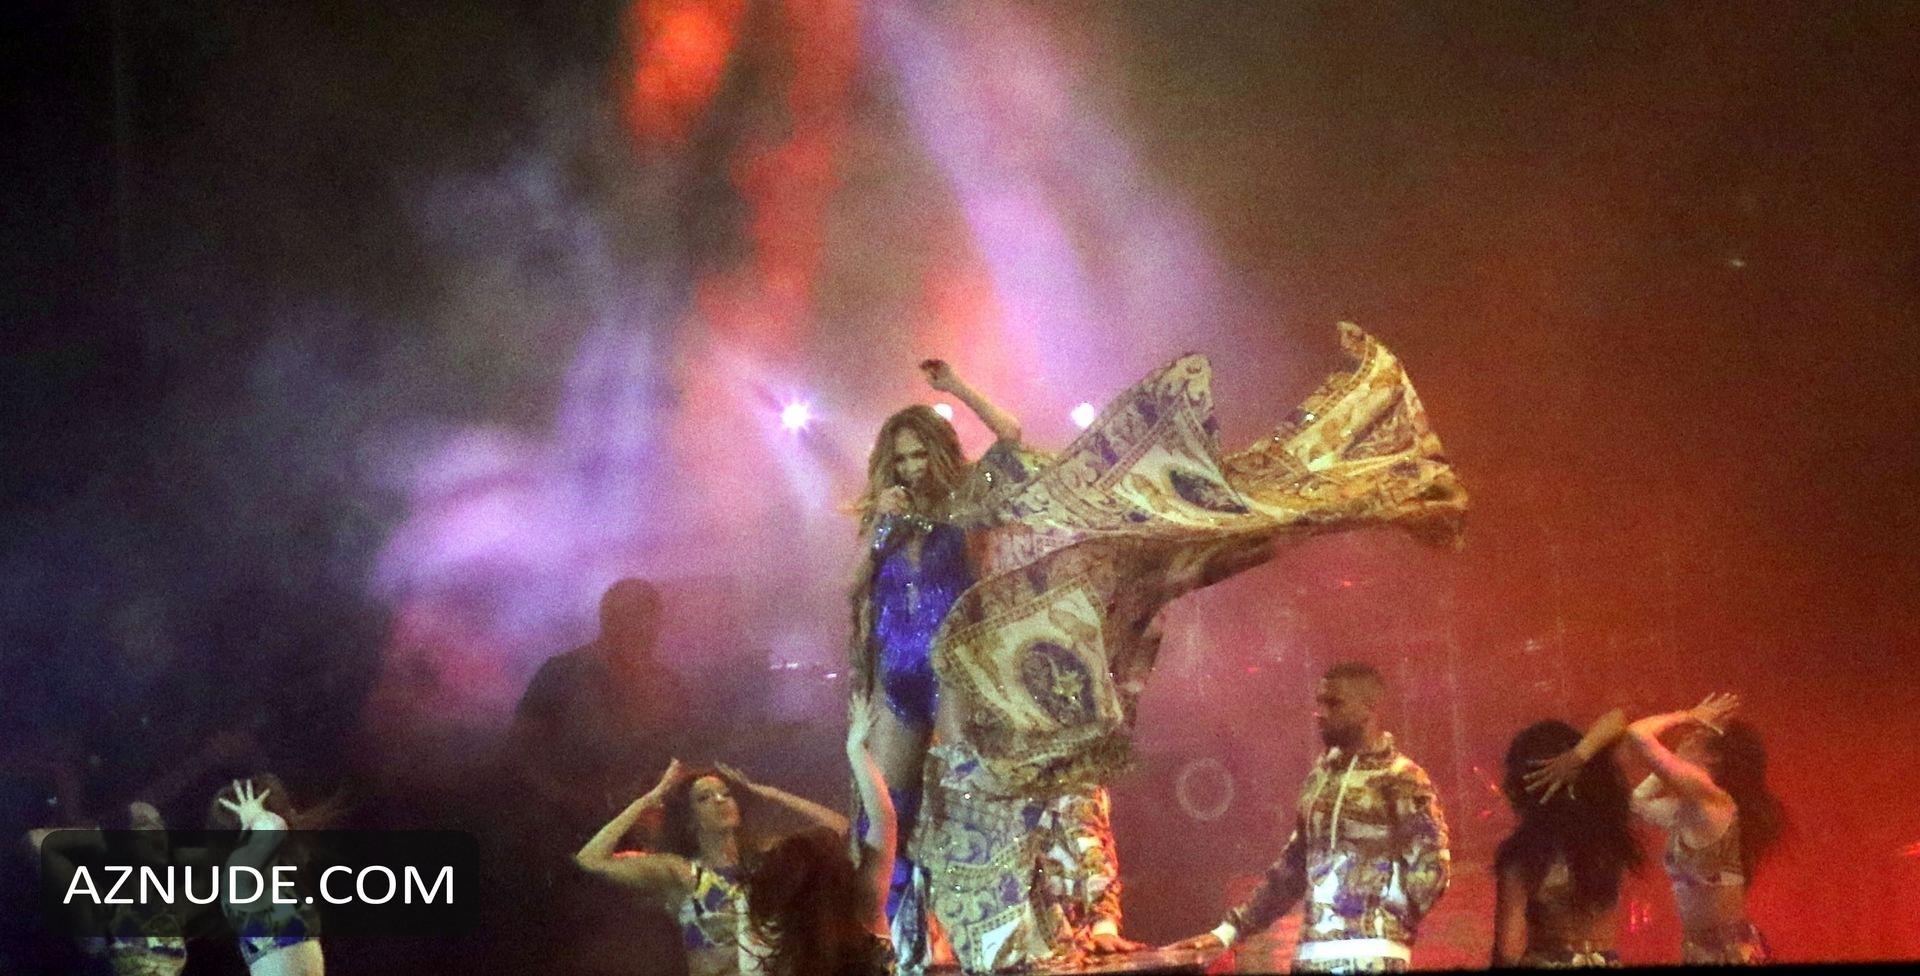 Jennifer Lopez Wows The Crowd During Her European Performance In